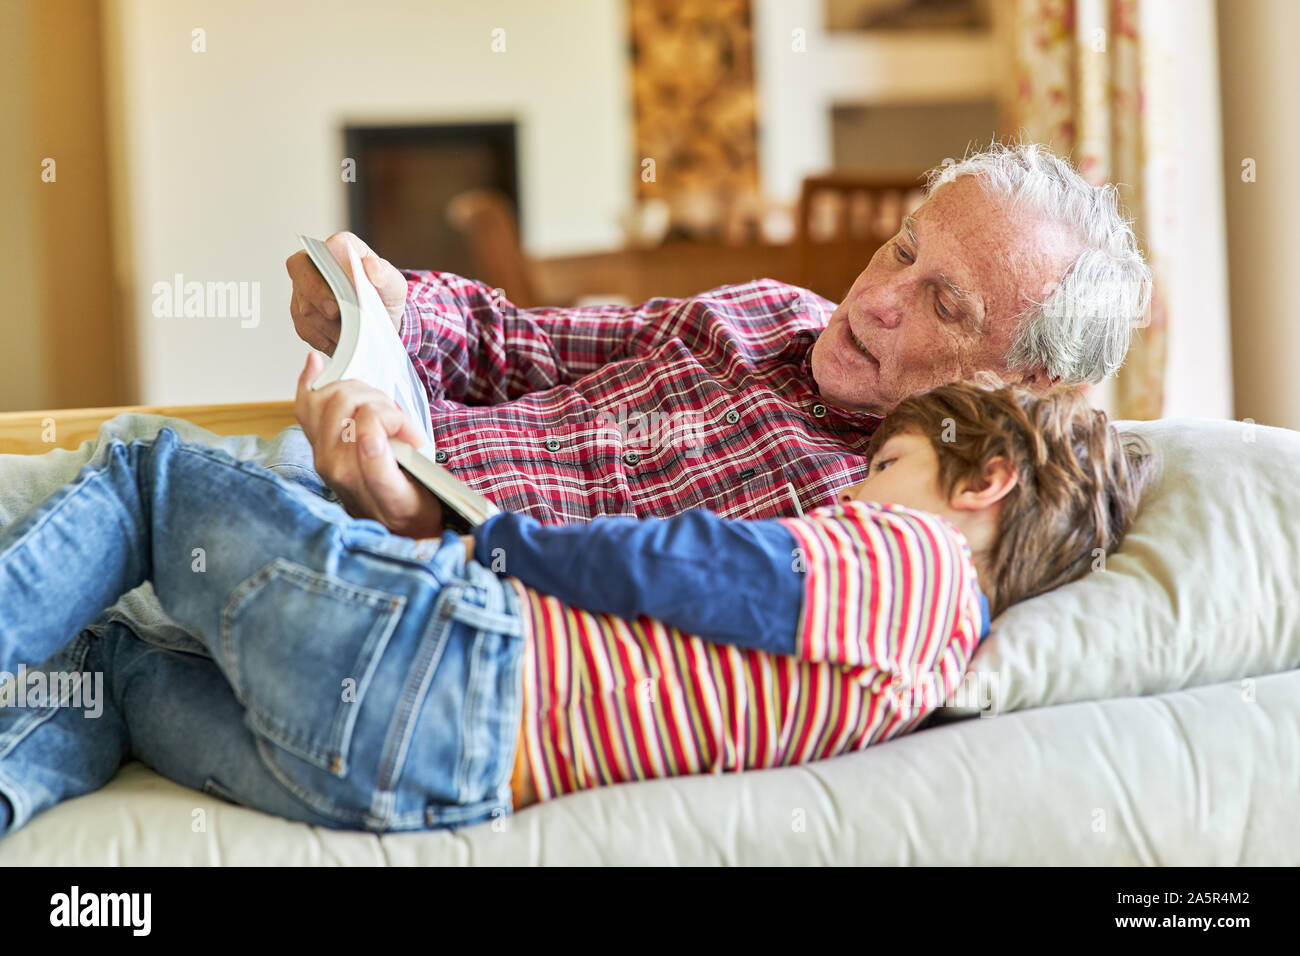 Grandpa reading a book with his grandchild on the couch at home Stock Photo